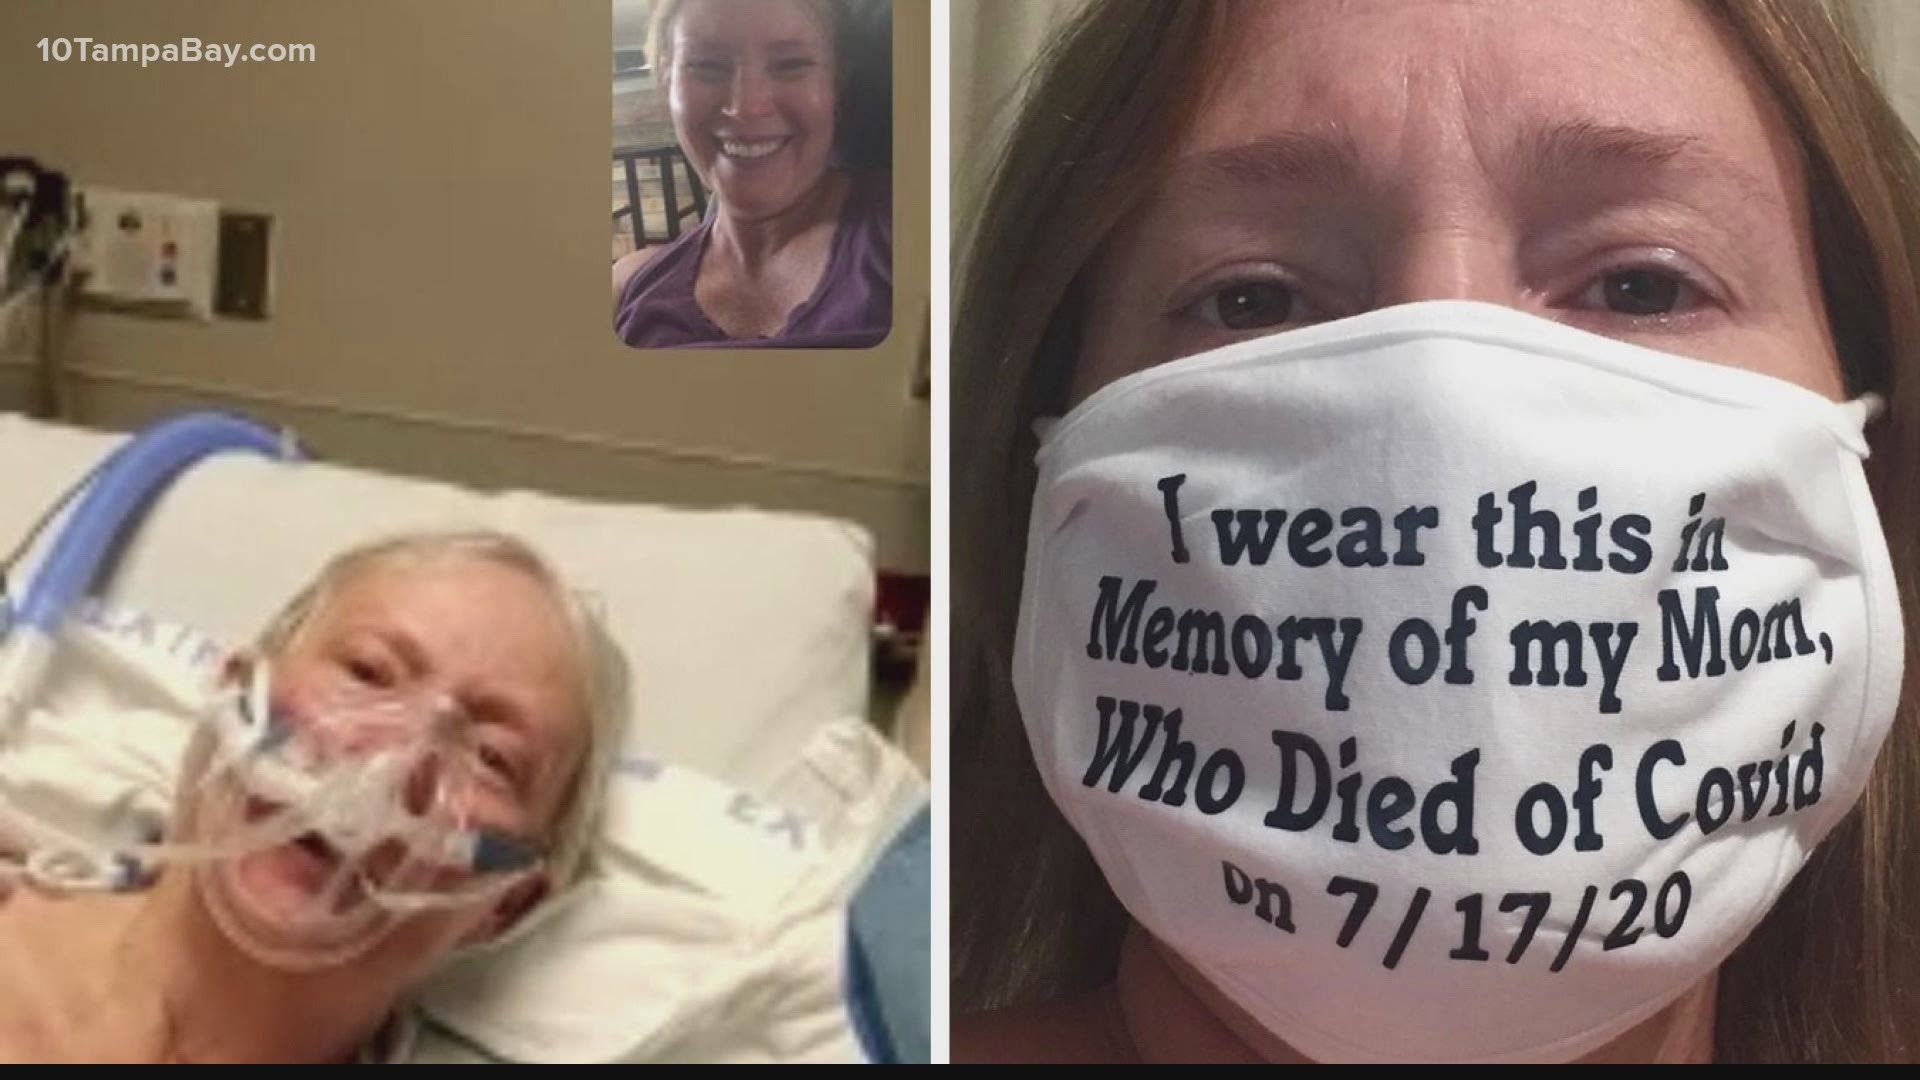 Julie Smith made a special mask after a loved one lost her battle with coronavirus. Now she encourages others to not take life for granted.